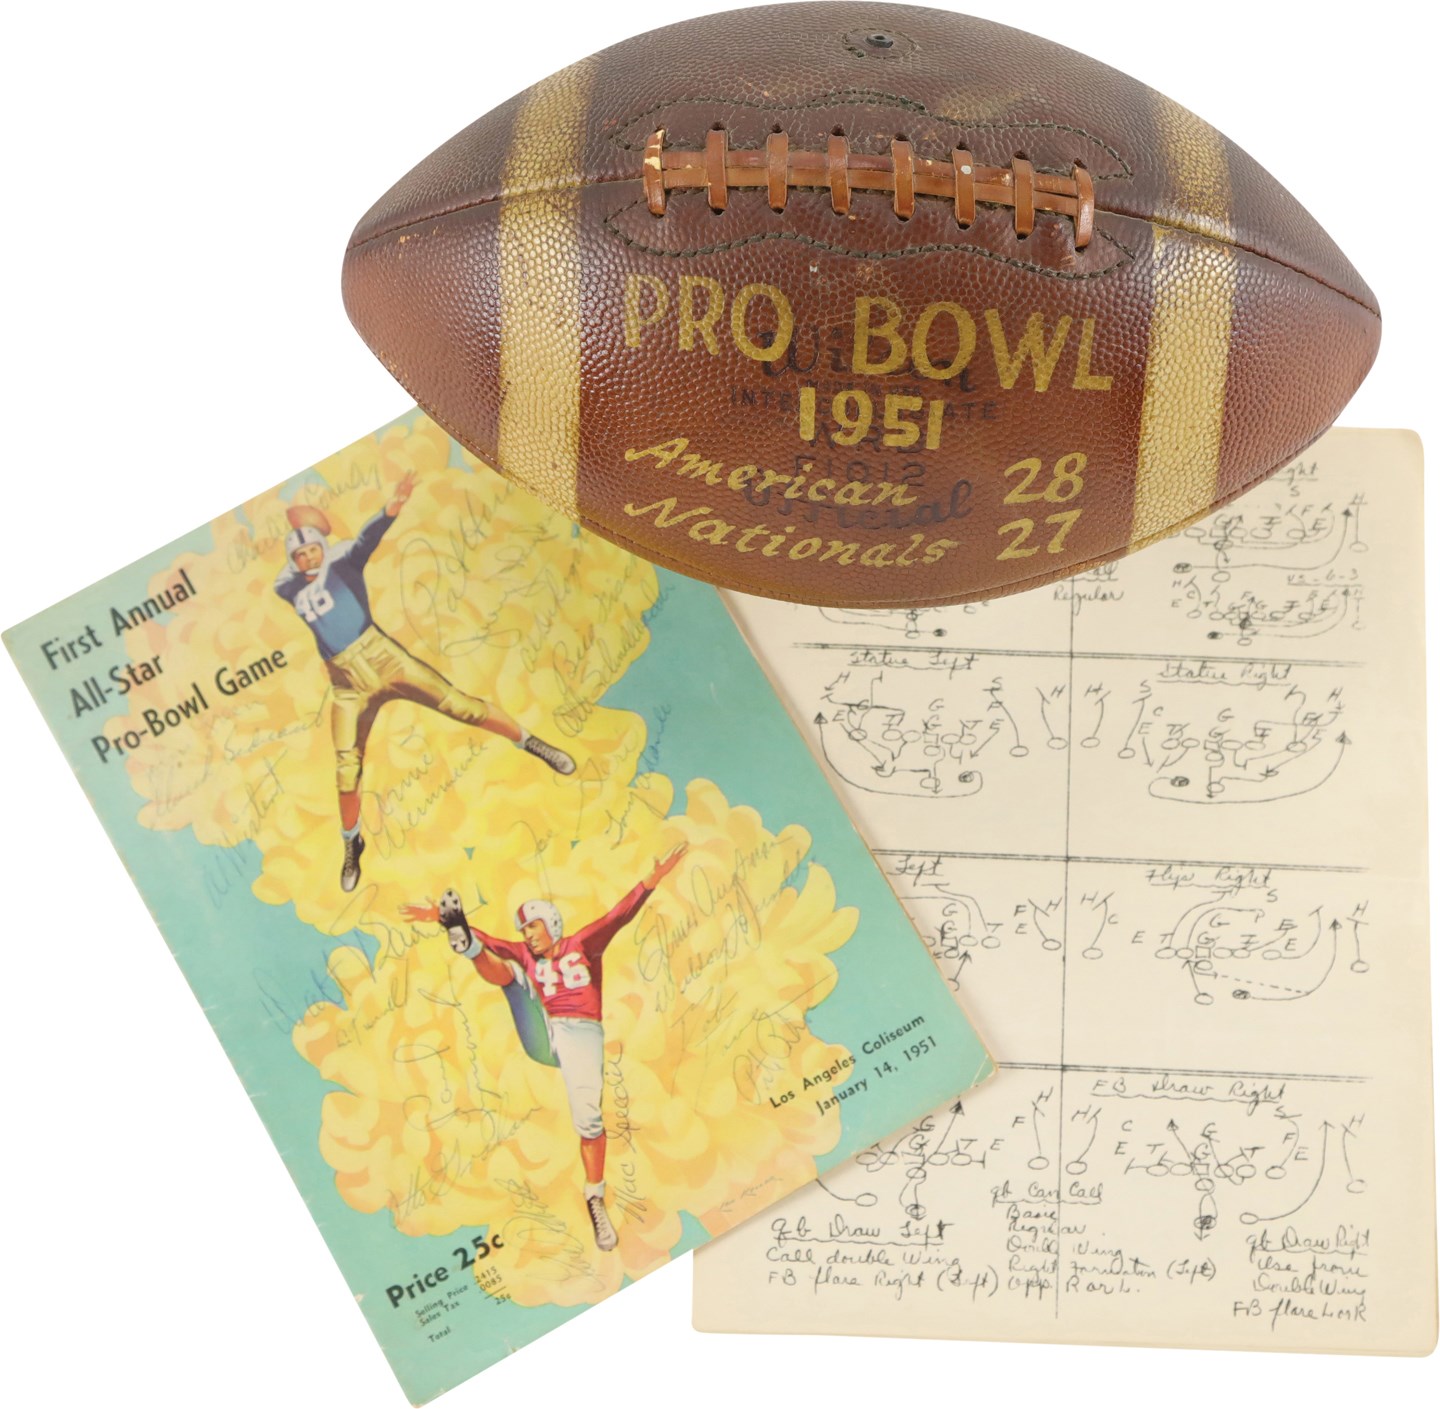 - Inaugural 1951 NFL Pro Bowl Game Ball, Signed Program, and Mac Speedie's Personal Playbook - Mac Speedie Collection